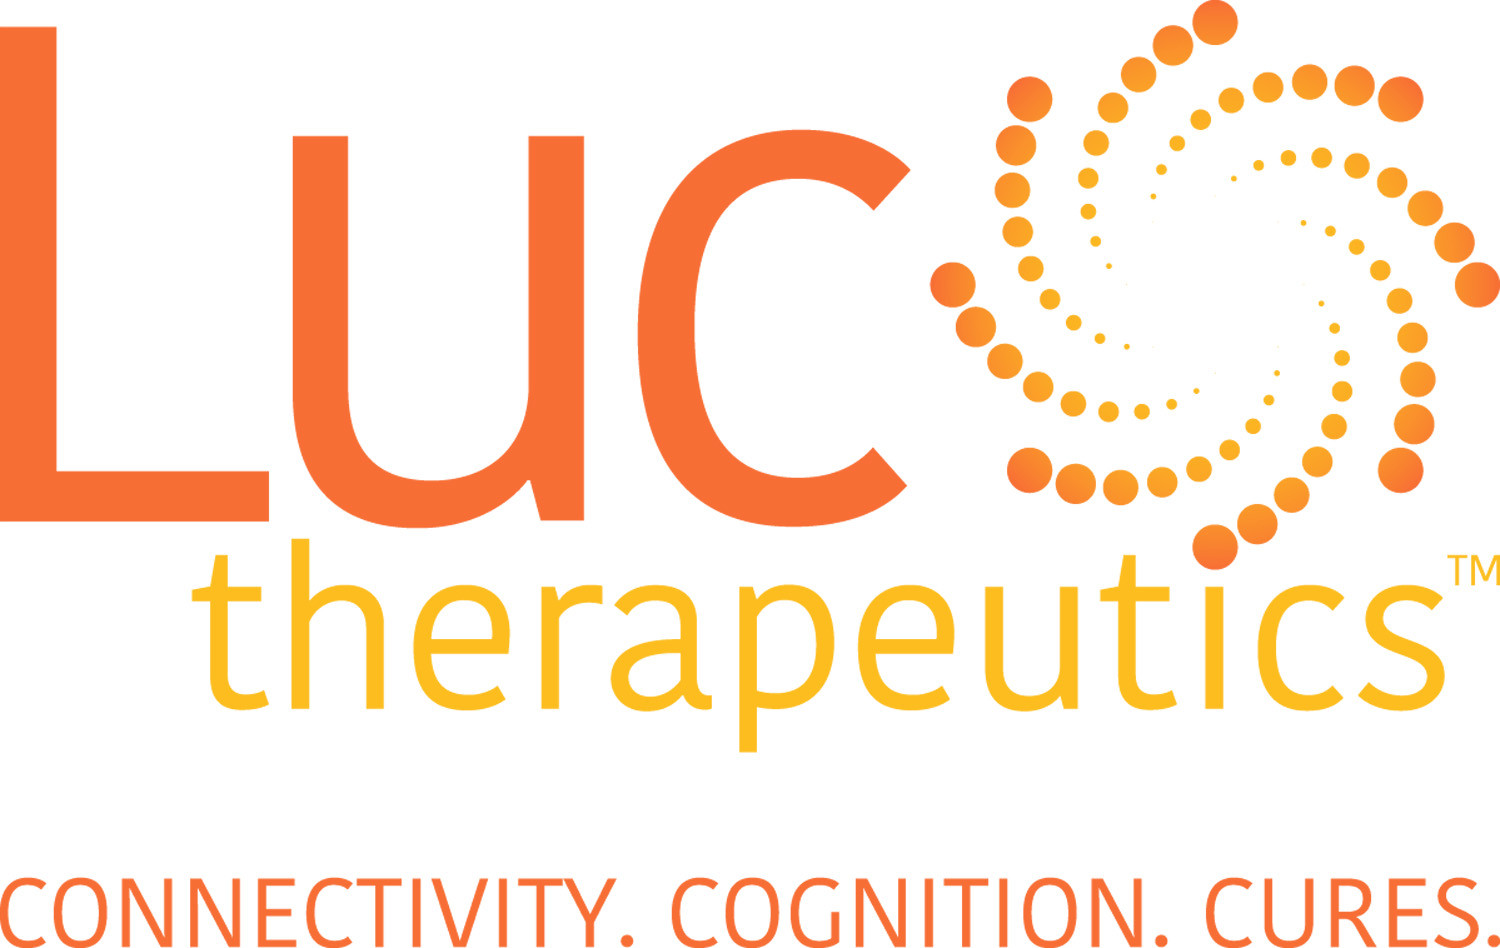 The newly named Luc Therapeutics, an early stage drug development firm that was begun in Providence, announced that it had signed a deal with Novartis for licensing and development of its new compound to create a fast-acting treatment for depression.